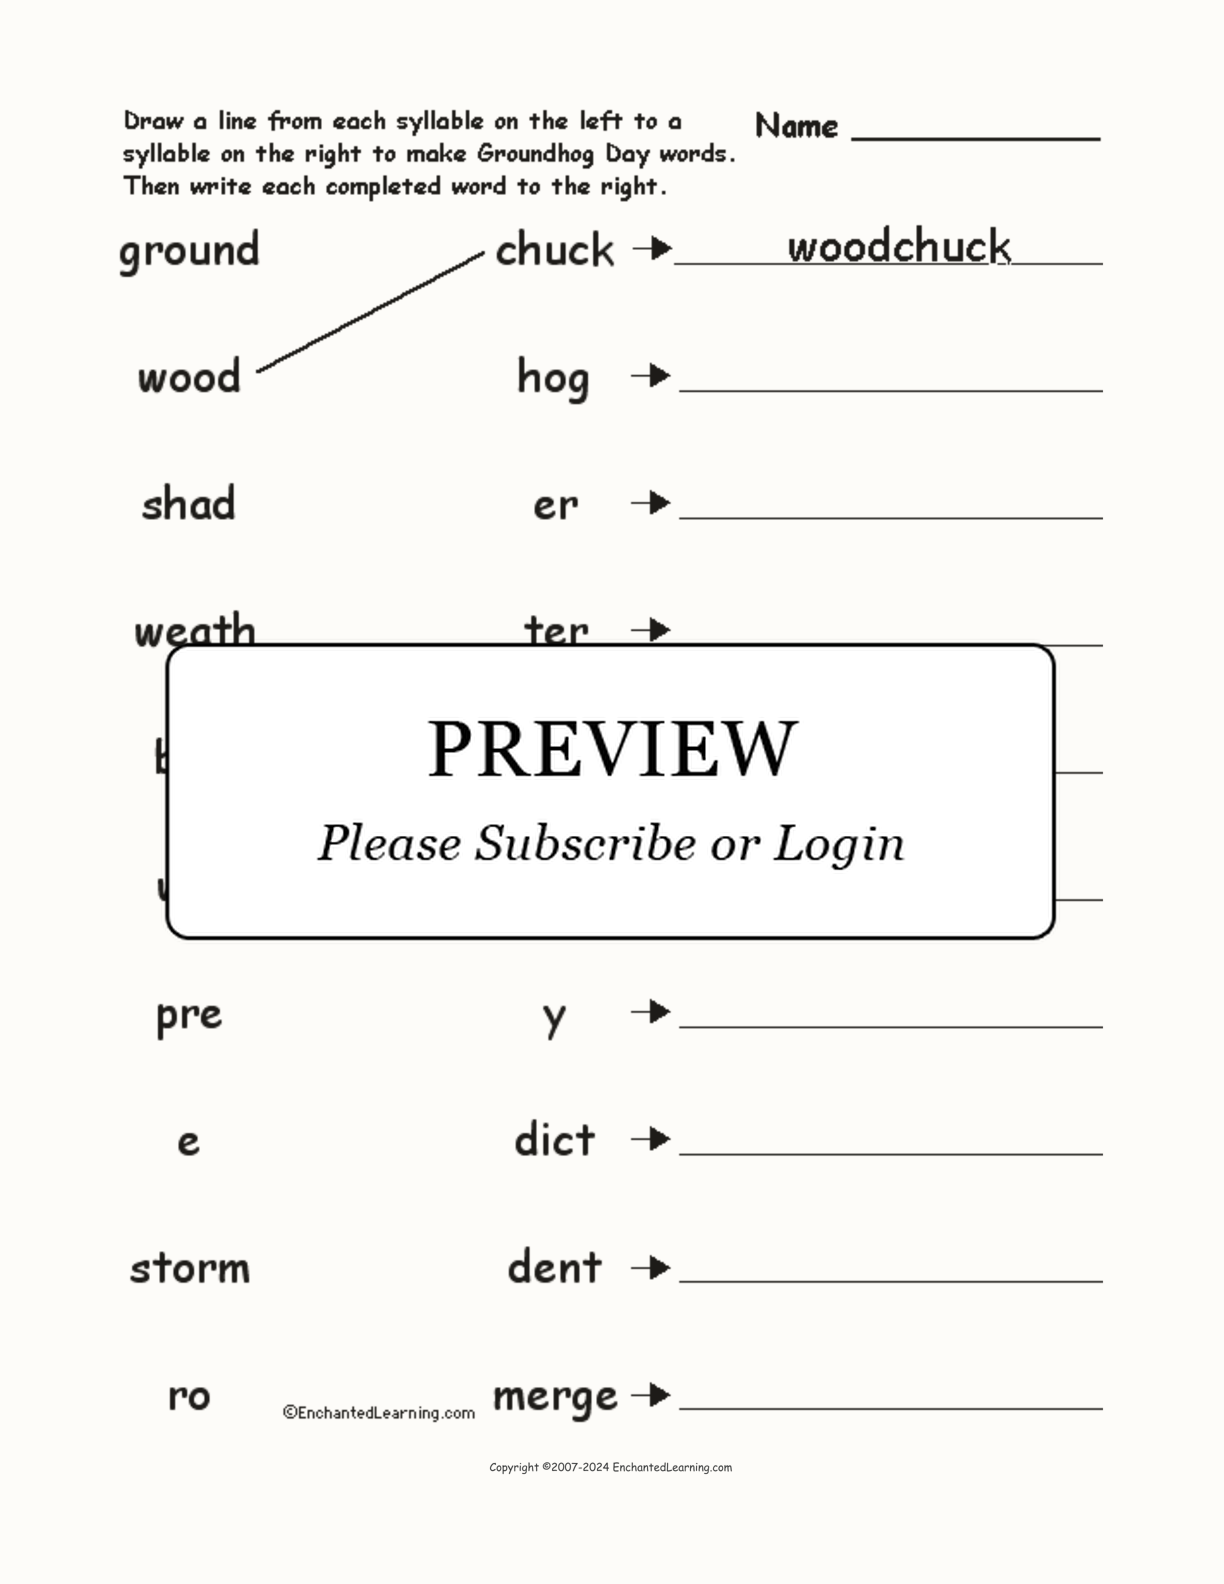 Match the Syllables: Groundhog Day Words interactive worksheet page 1